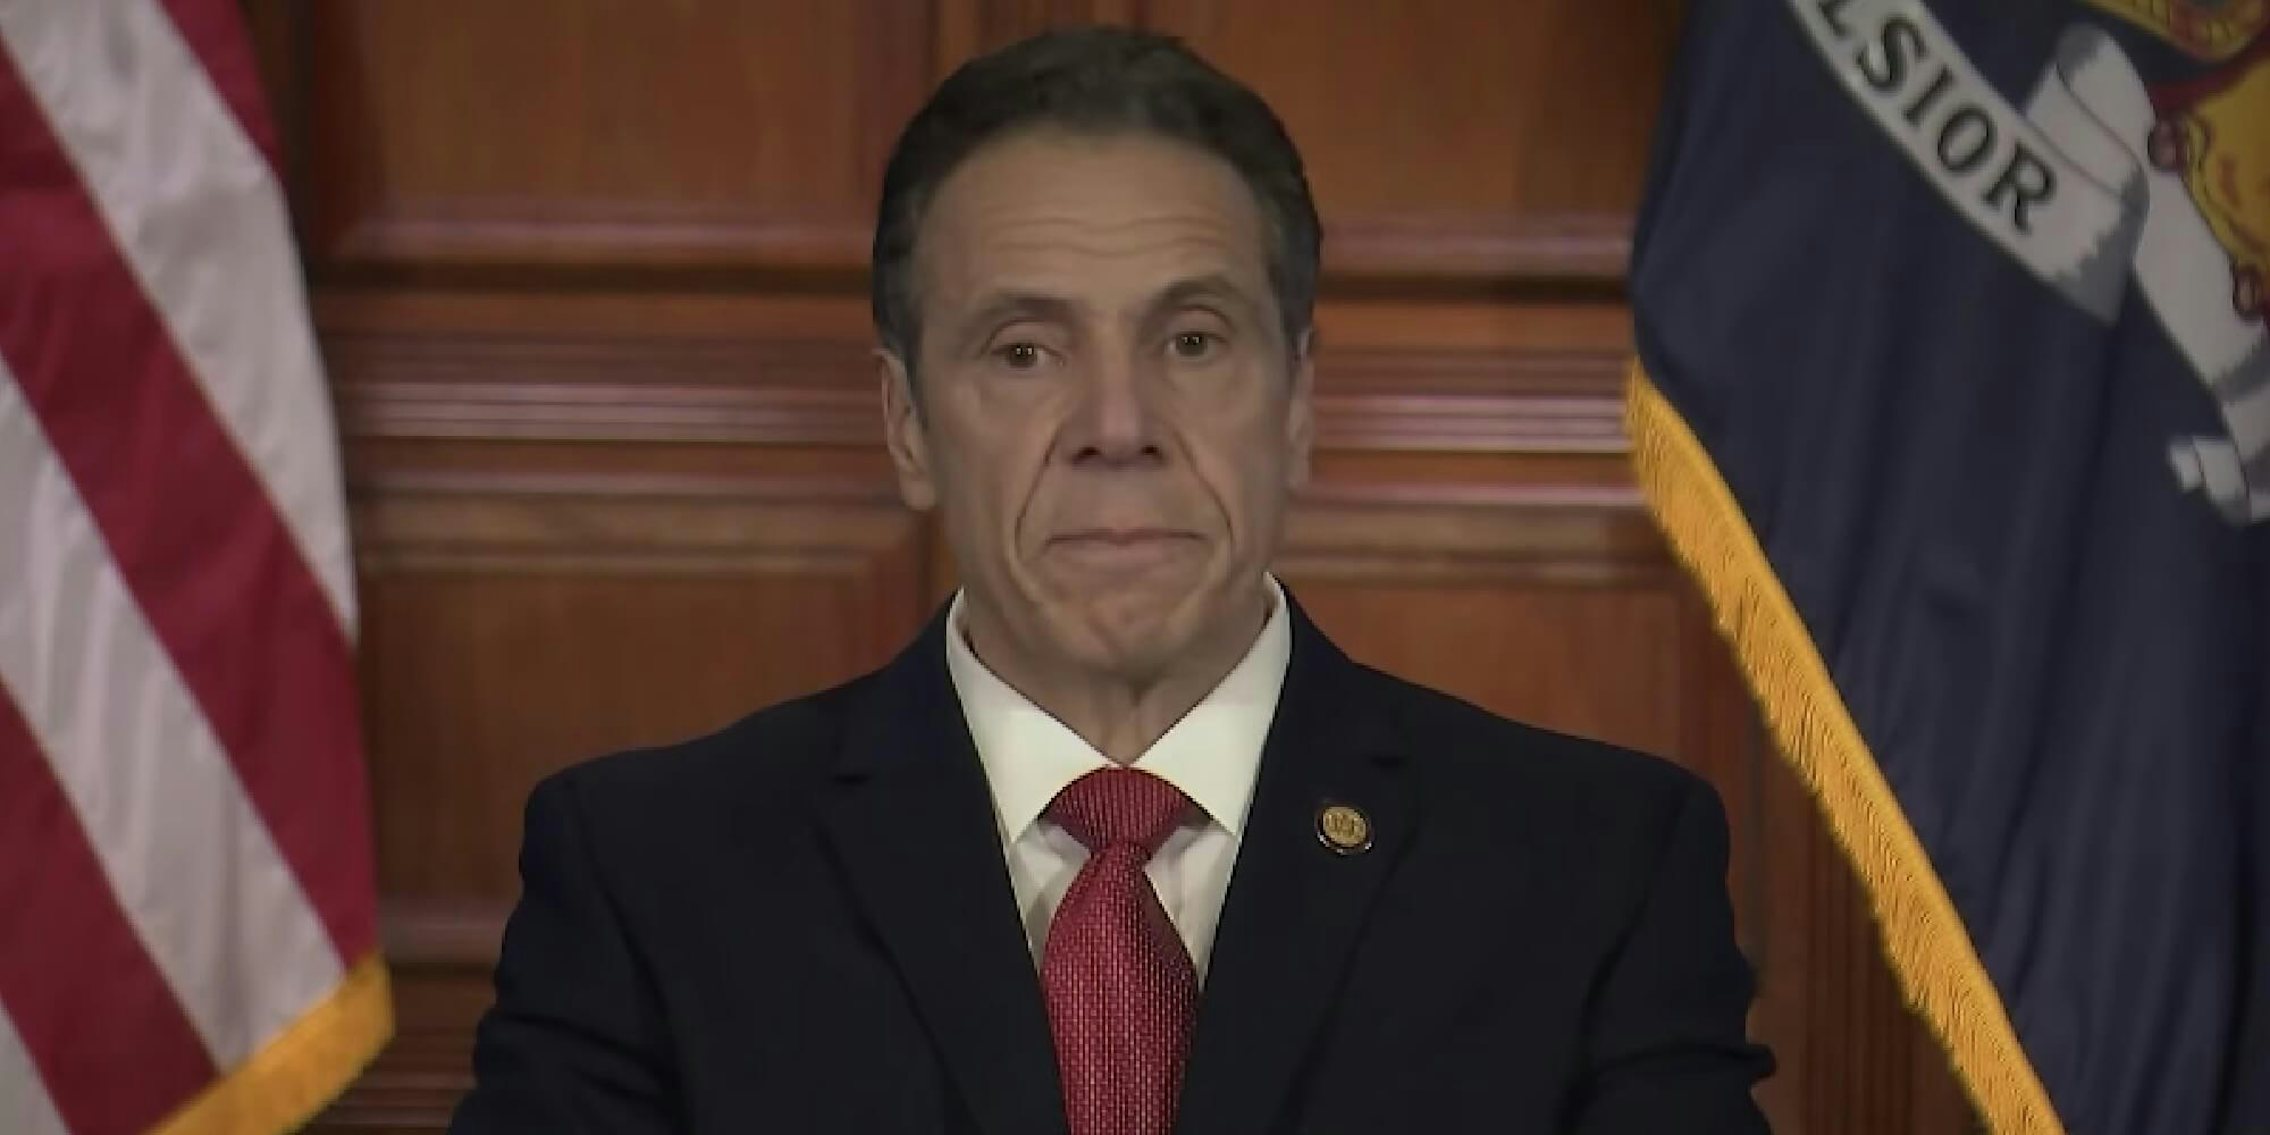 Andrew Cuomo at a press conference